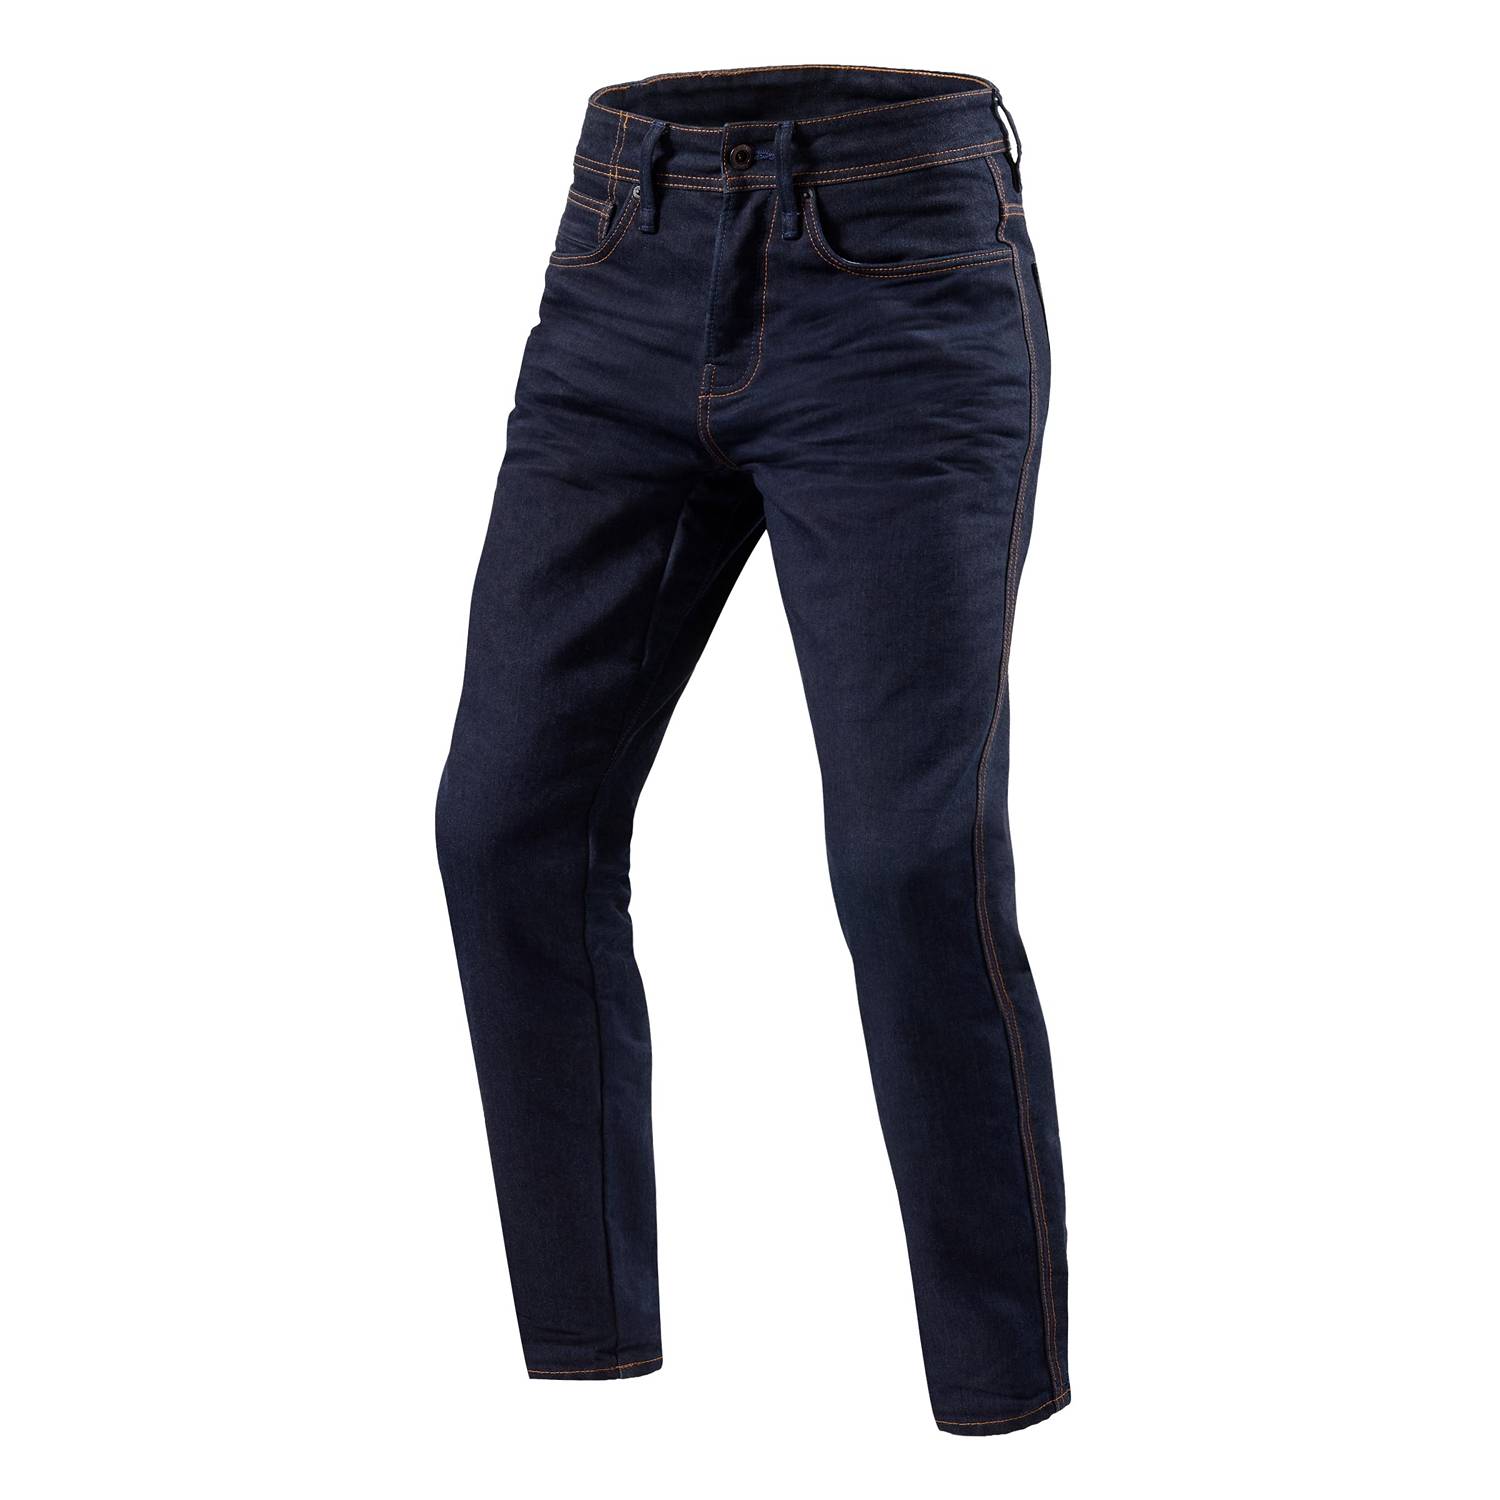 Image of REV'IT! Jeans Reed RF Dark Blue Used Motorcycle Jeans Size L32/W30 ID 8700001336970